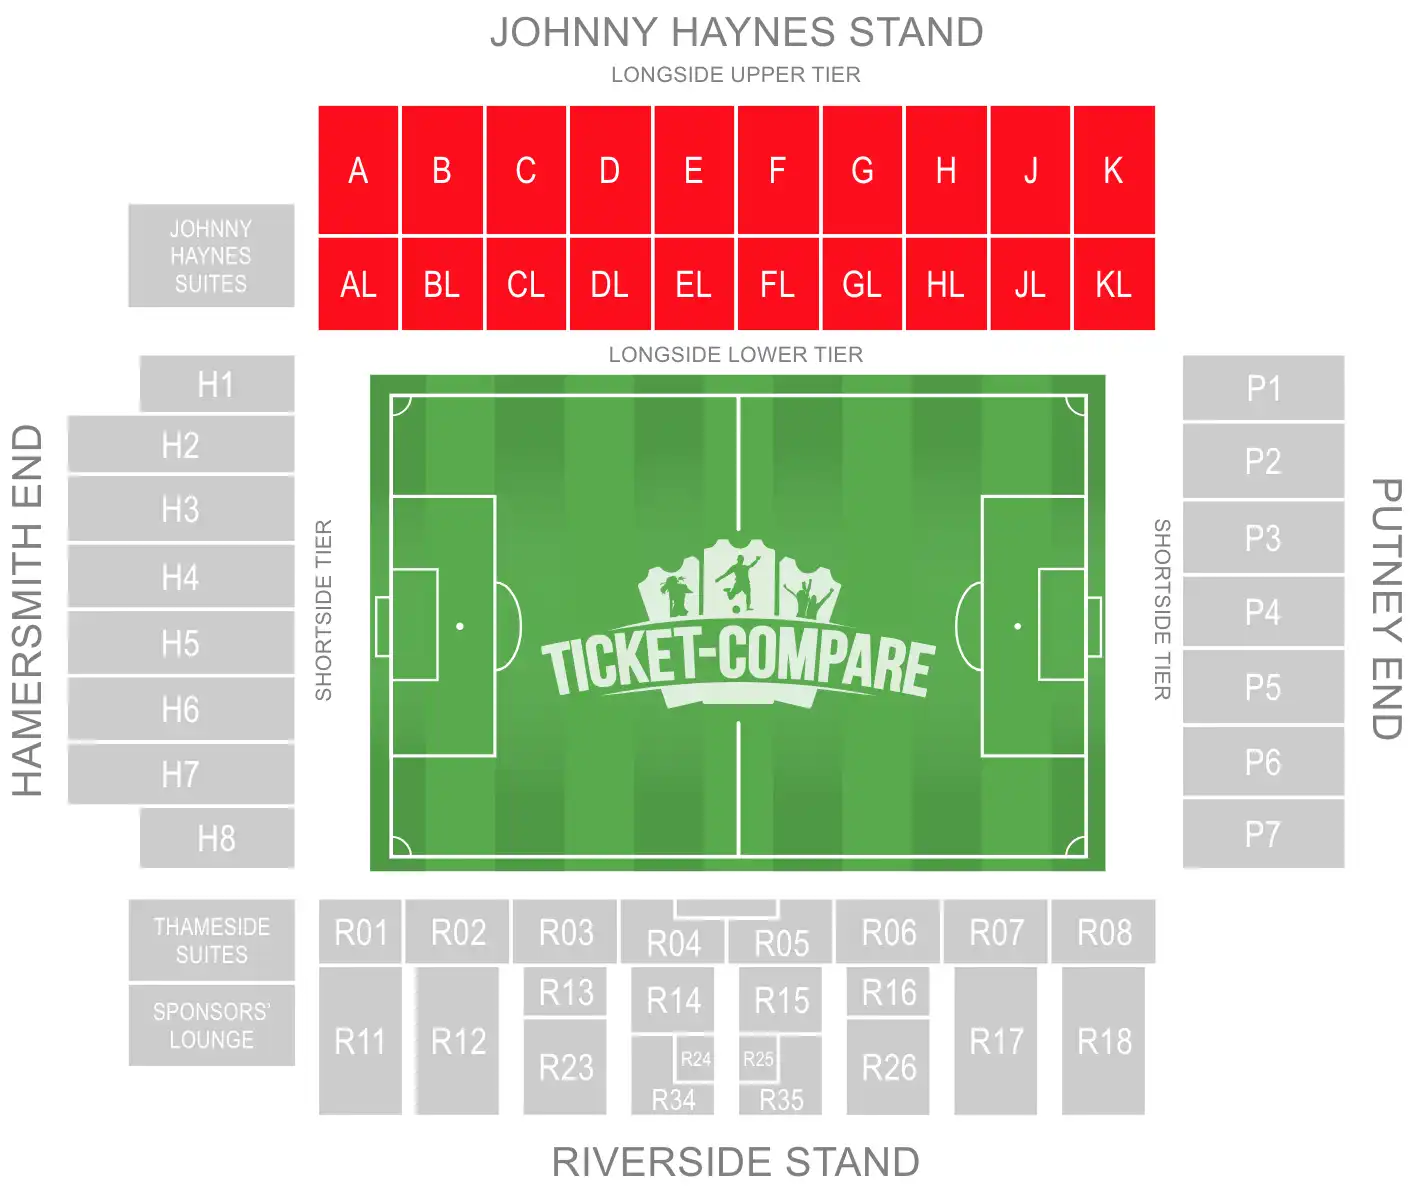 Craven Cottage Seating Plan with highligted the Johnny Haynes Stand